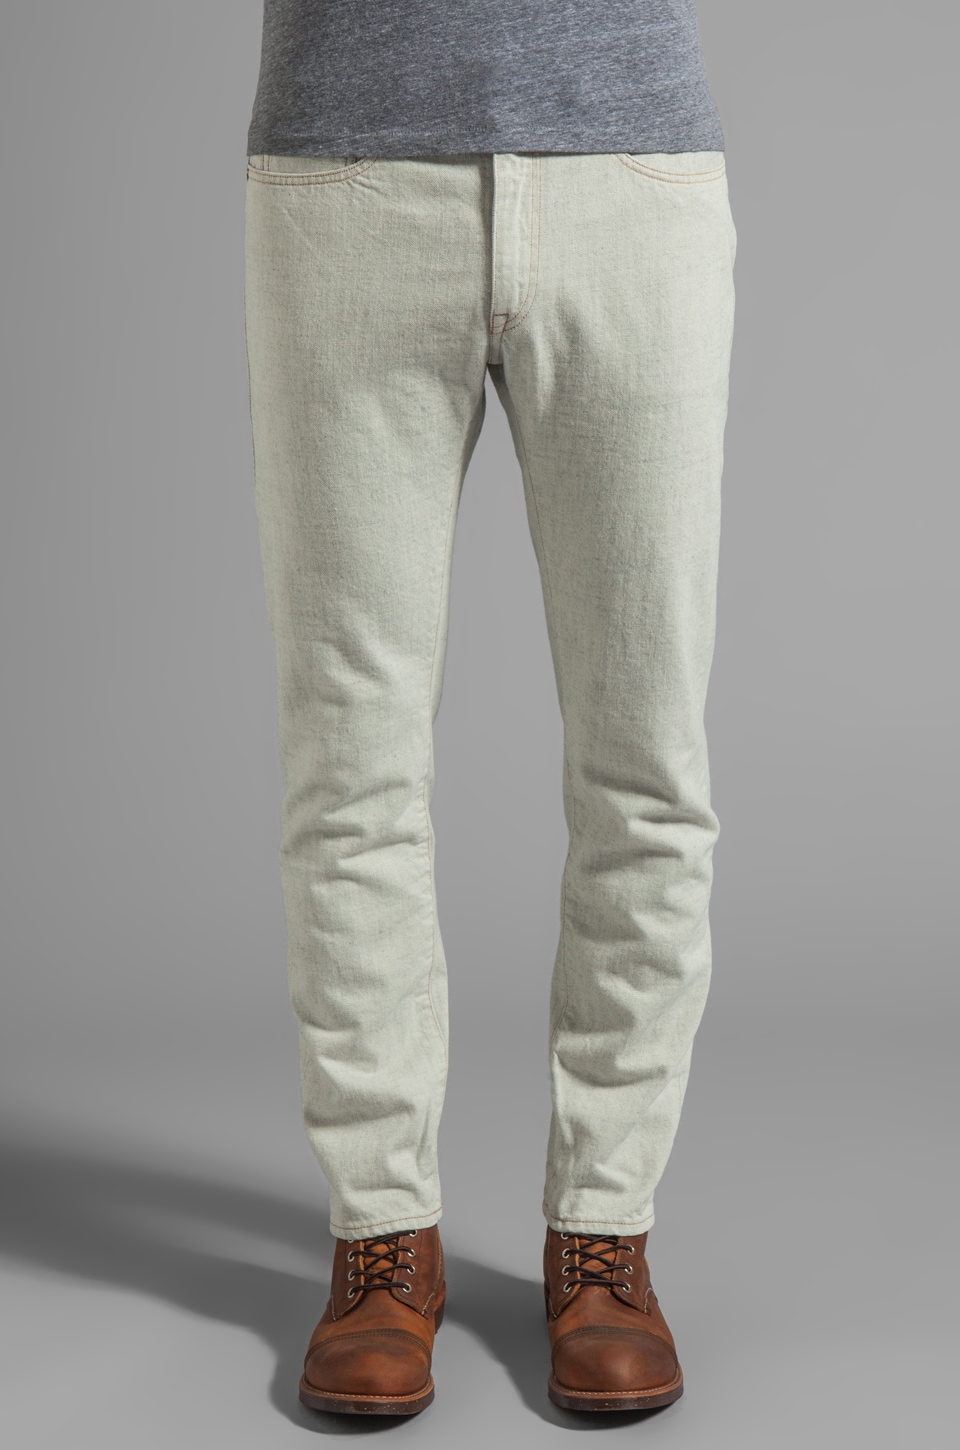 LEVI'S: Made & Crafted Tack Slim in Winter White Selvedge | REVOLVE